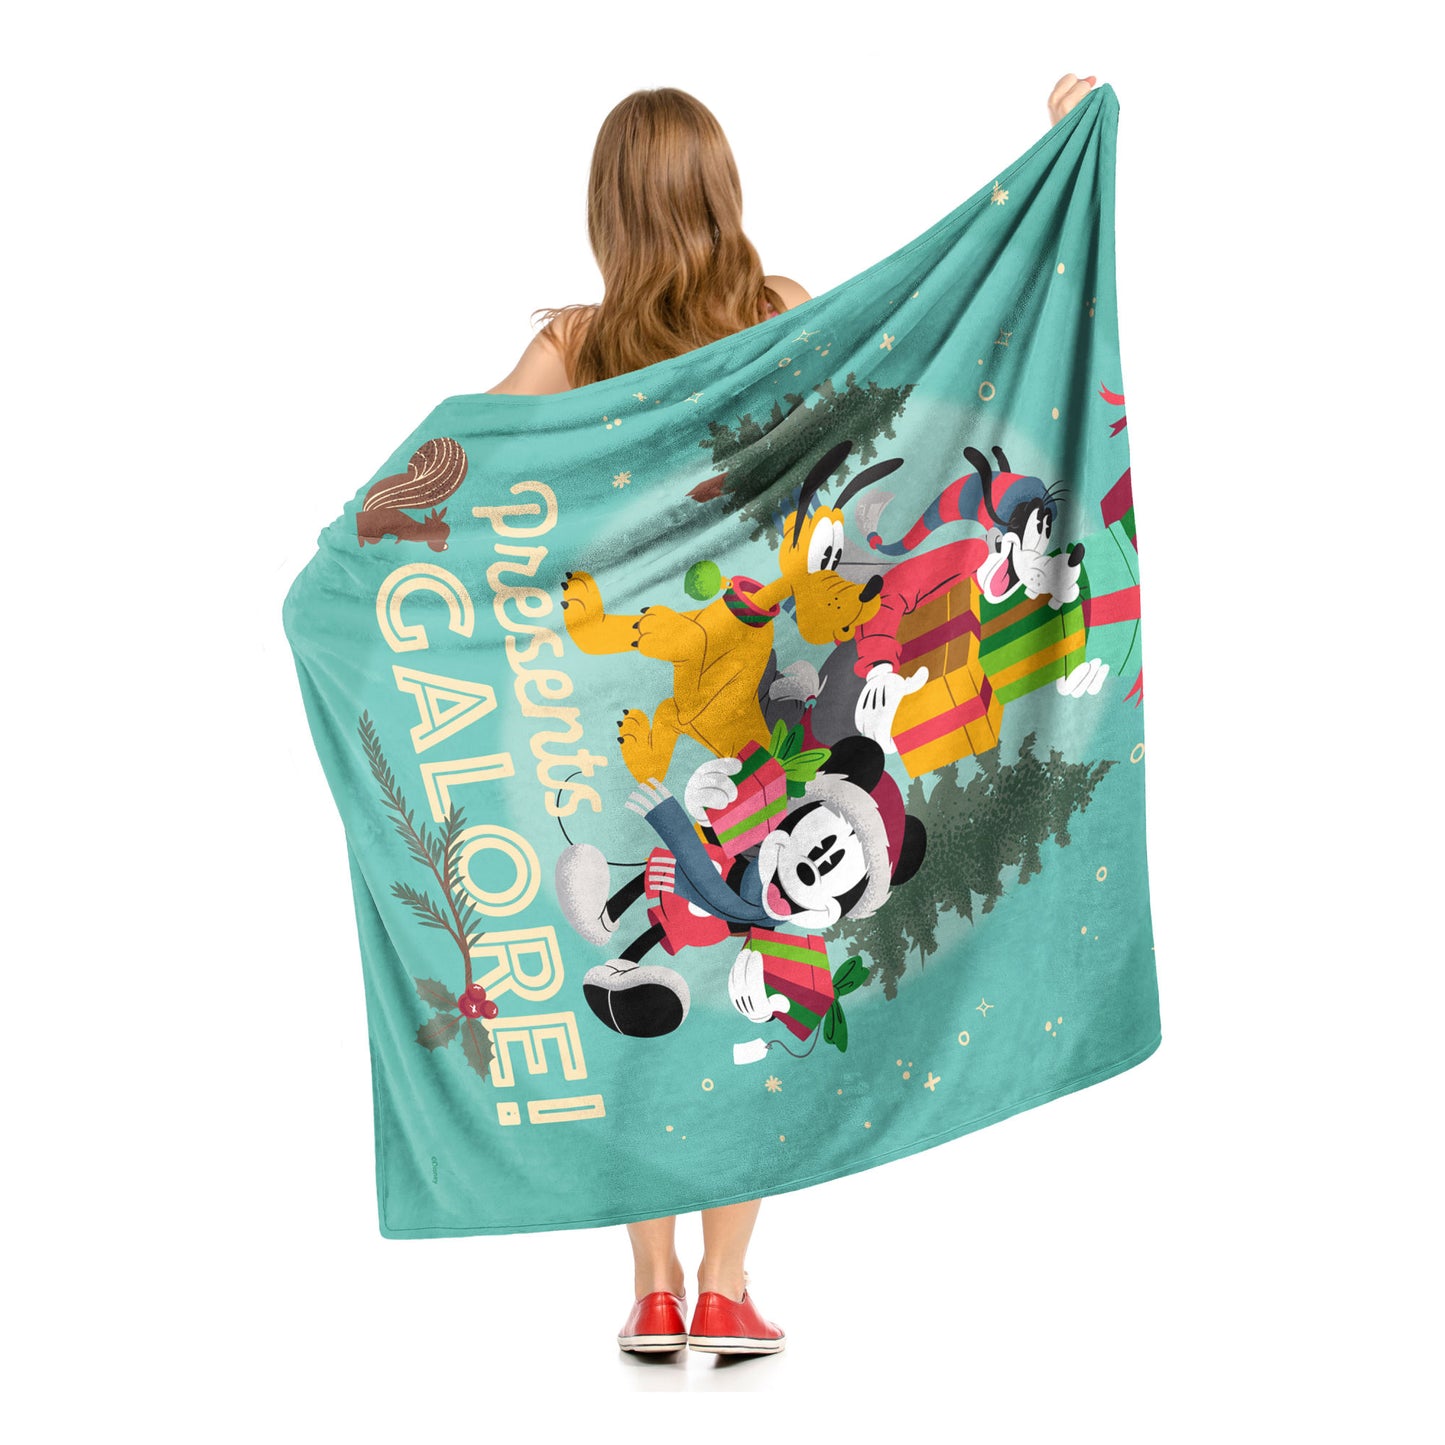 Mickey Mouse, Presents Galore Throw Blanket 50"x60"